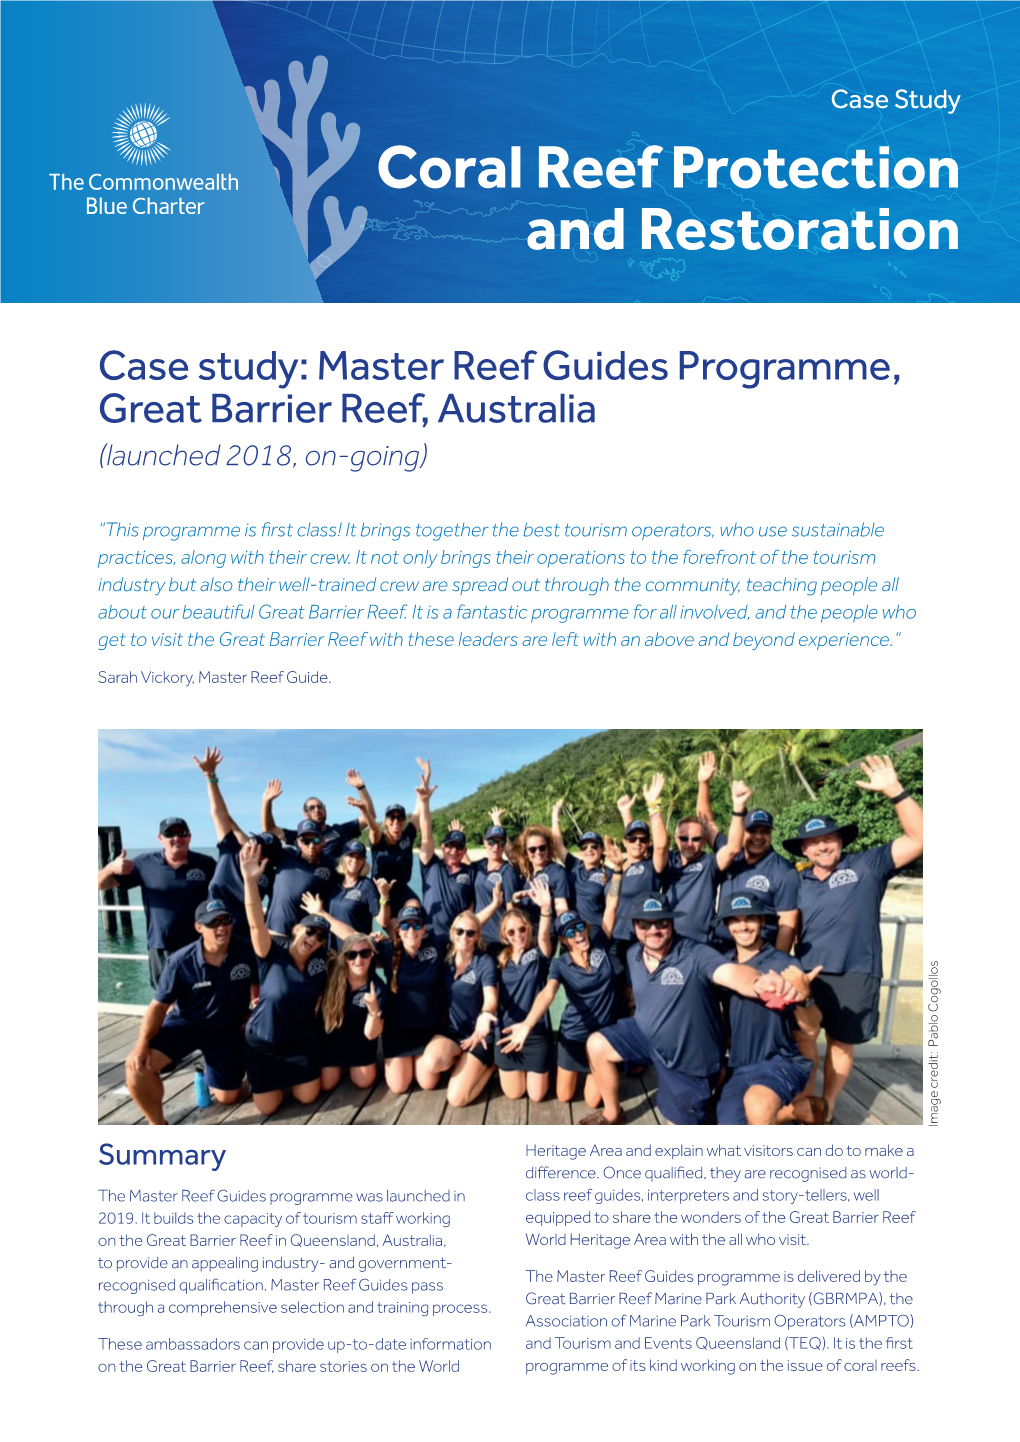 Case Study: Master Reef Guides Programme, Great Barrier Reef, Australia (Launched 2018, On-Going)